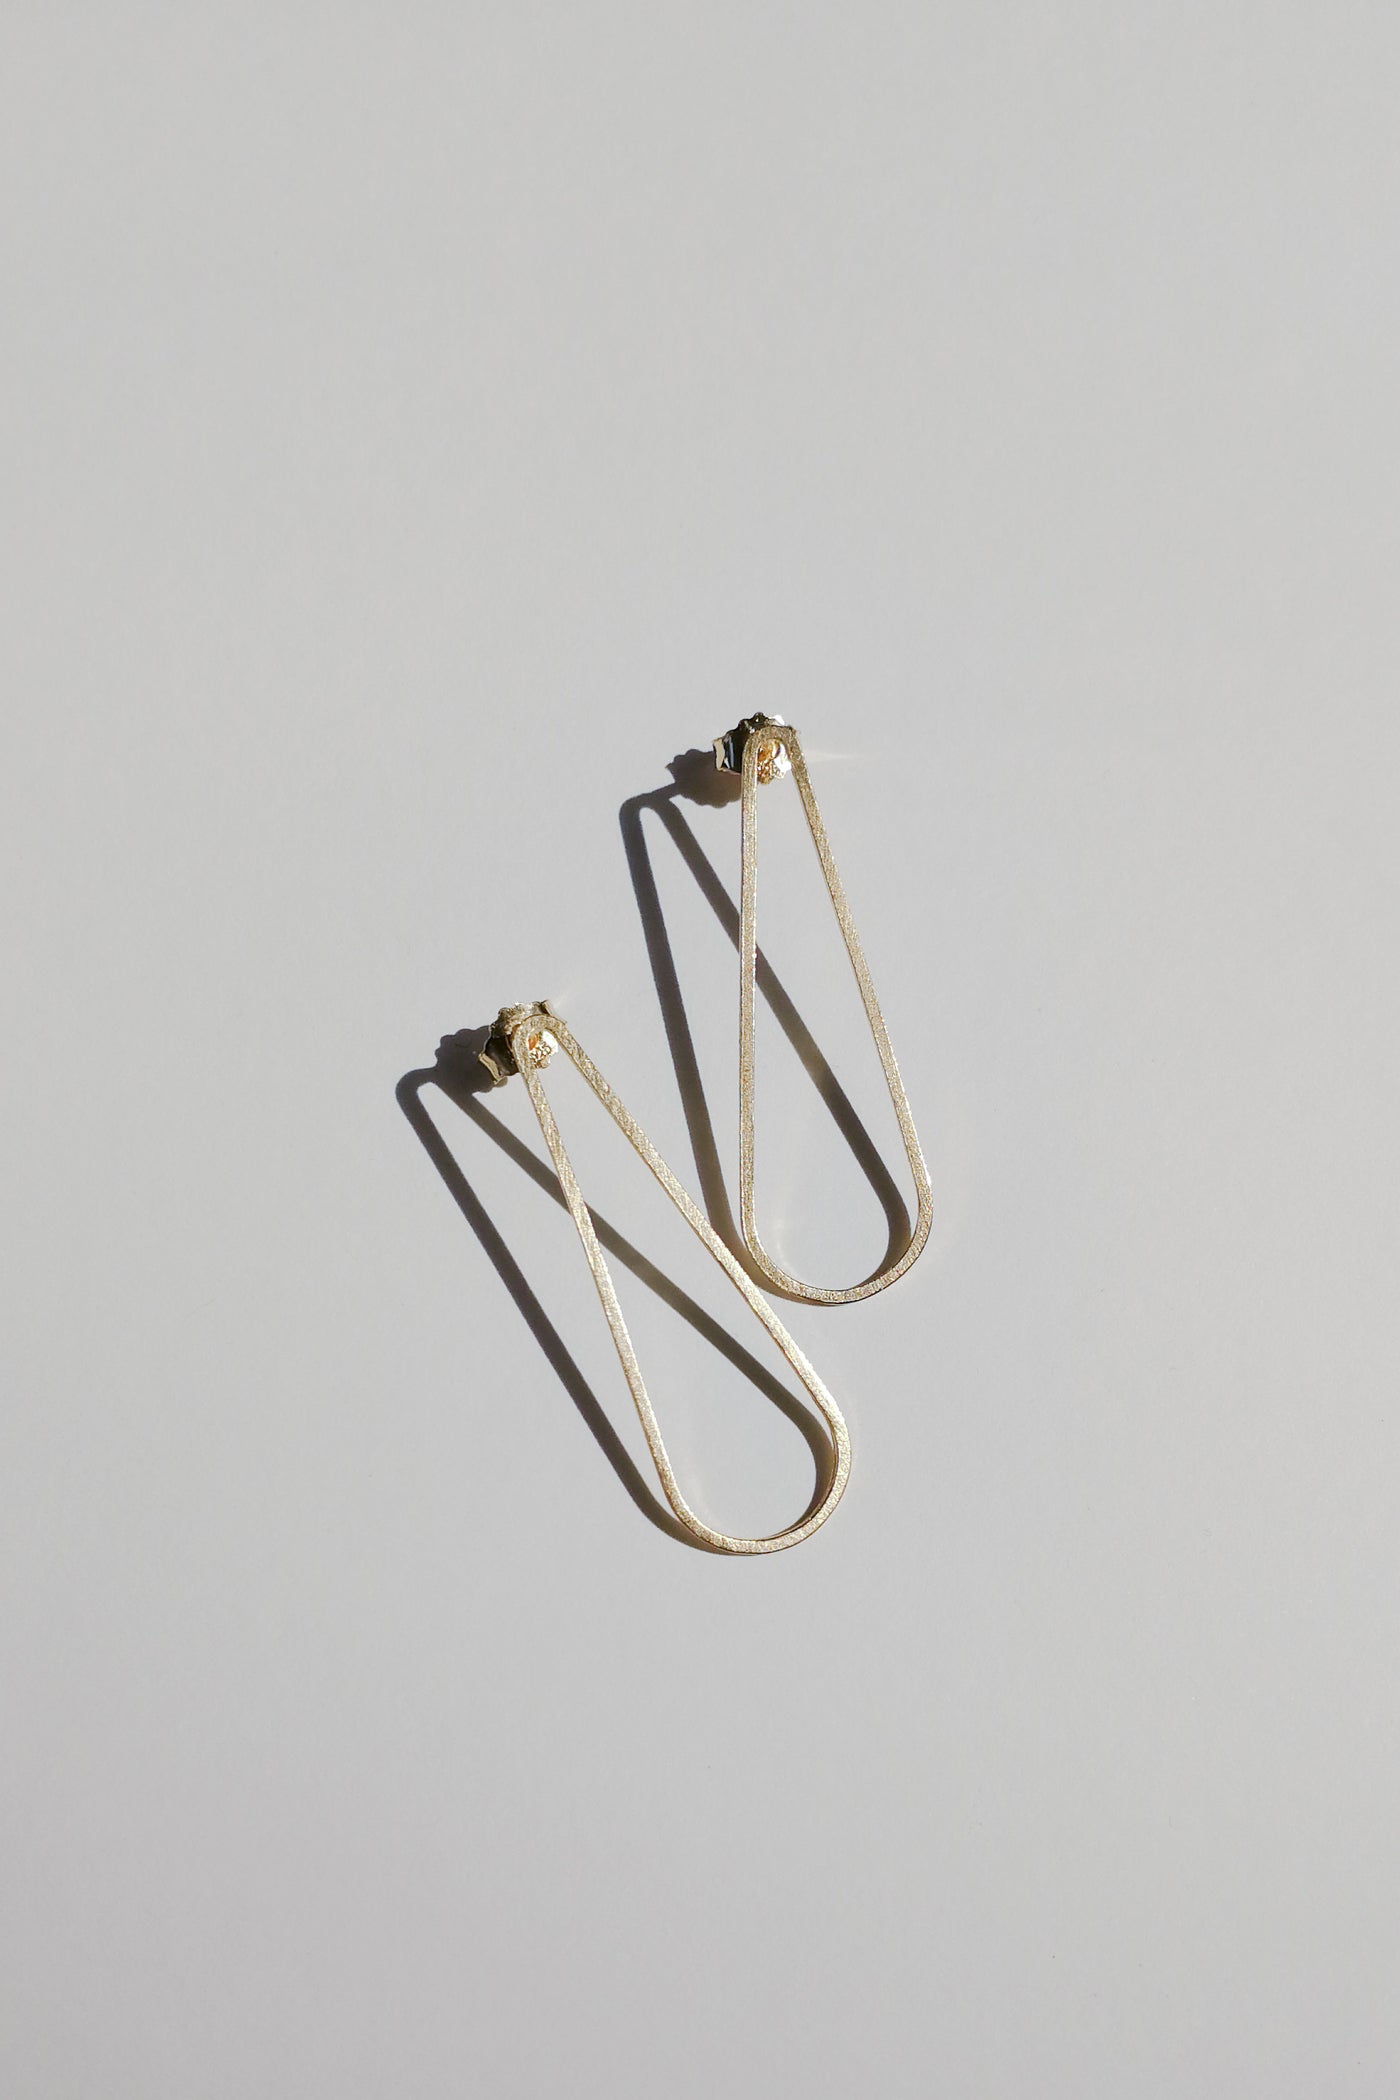 Line earrings no3, gold-plated